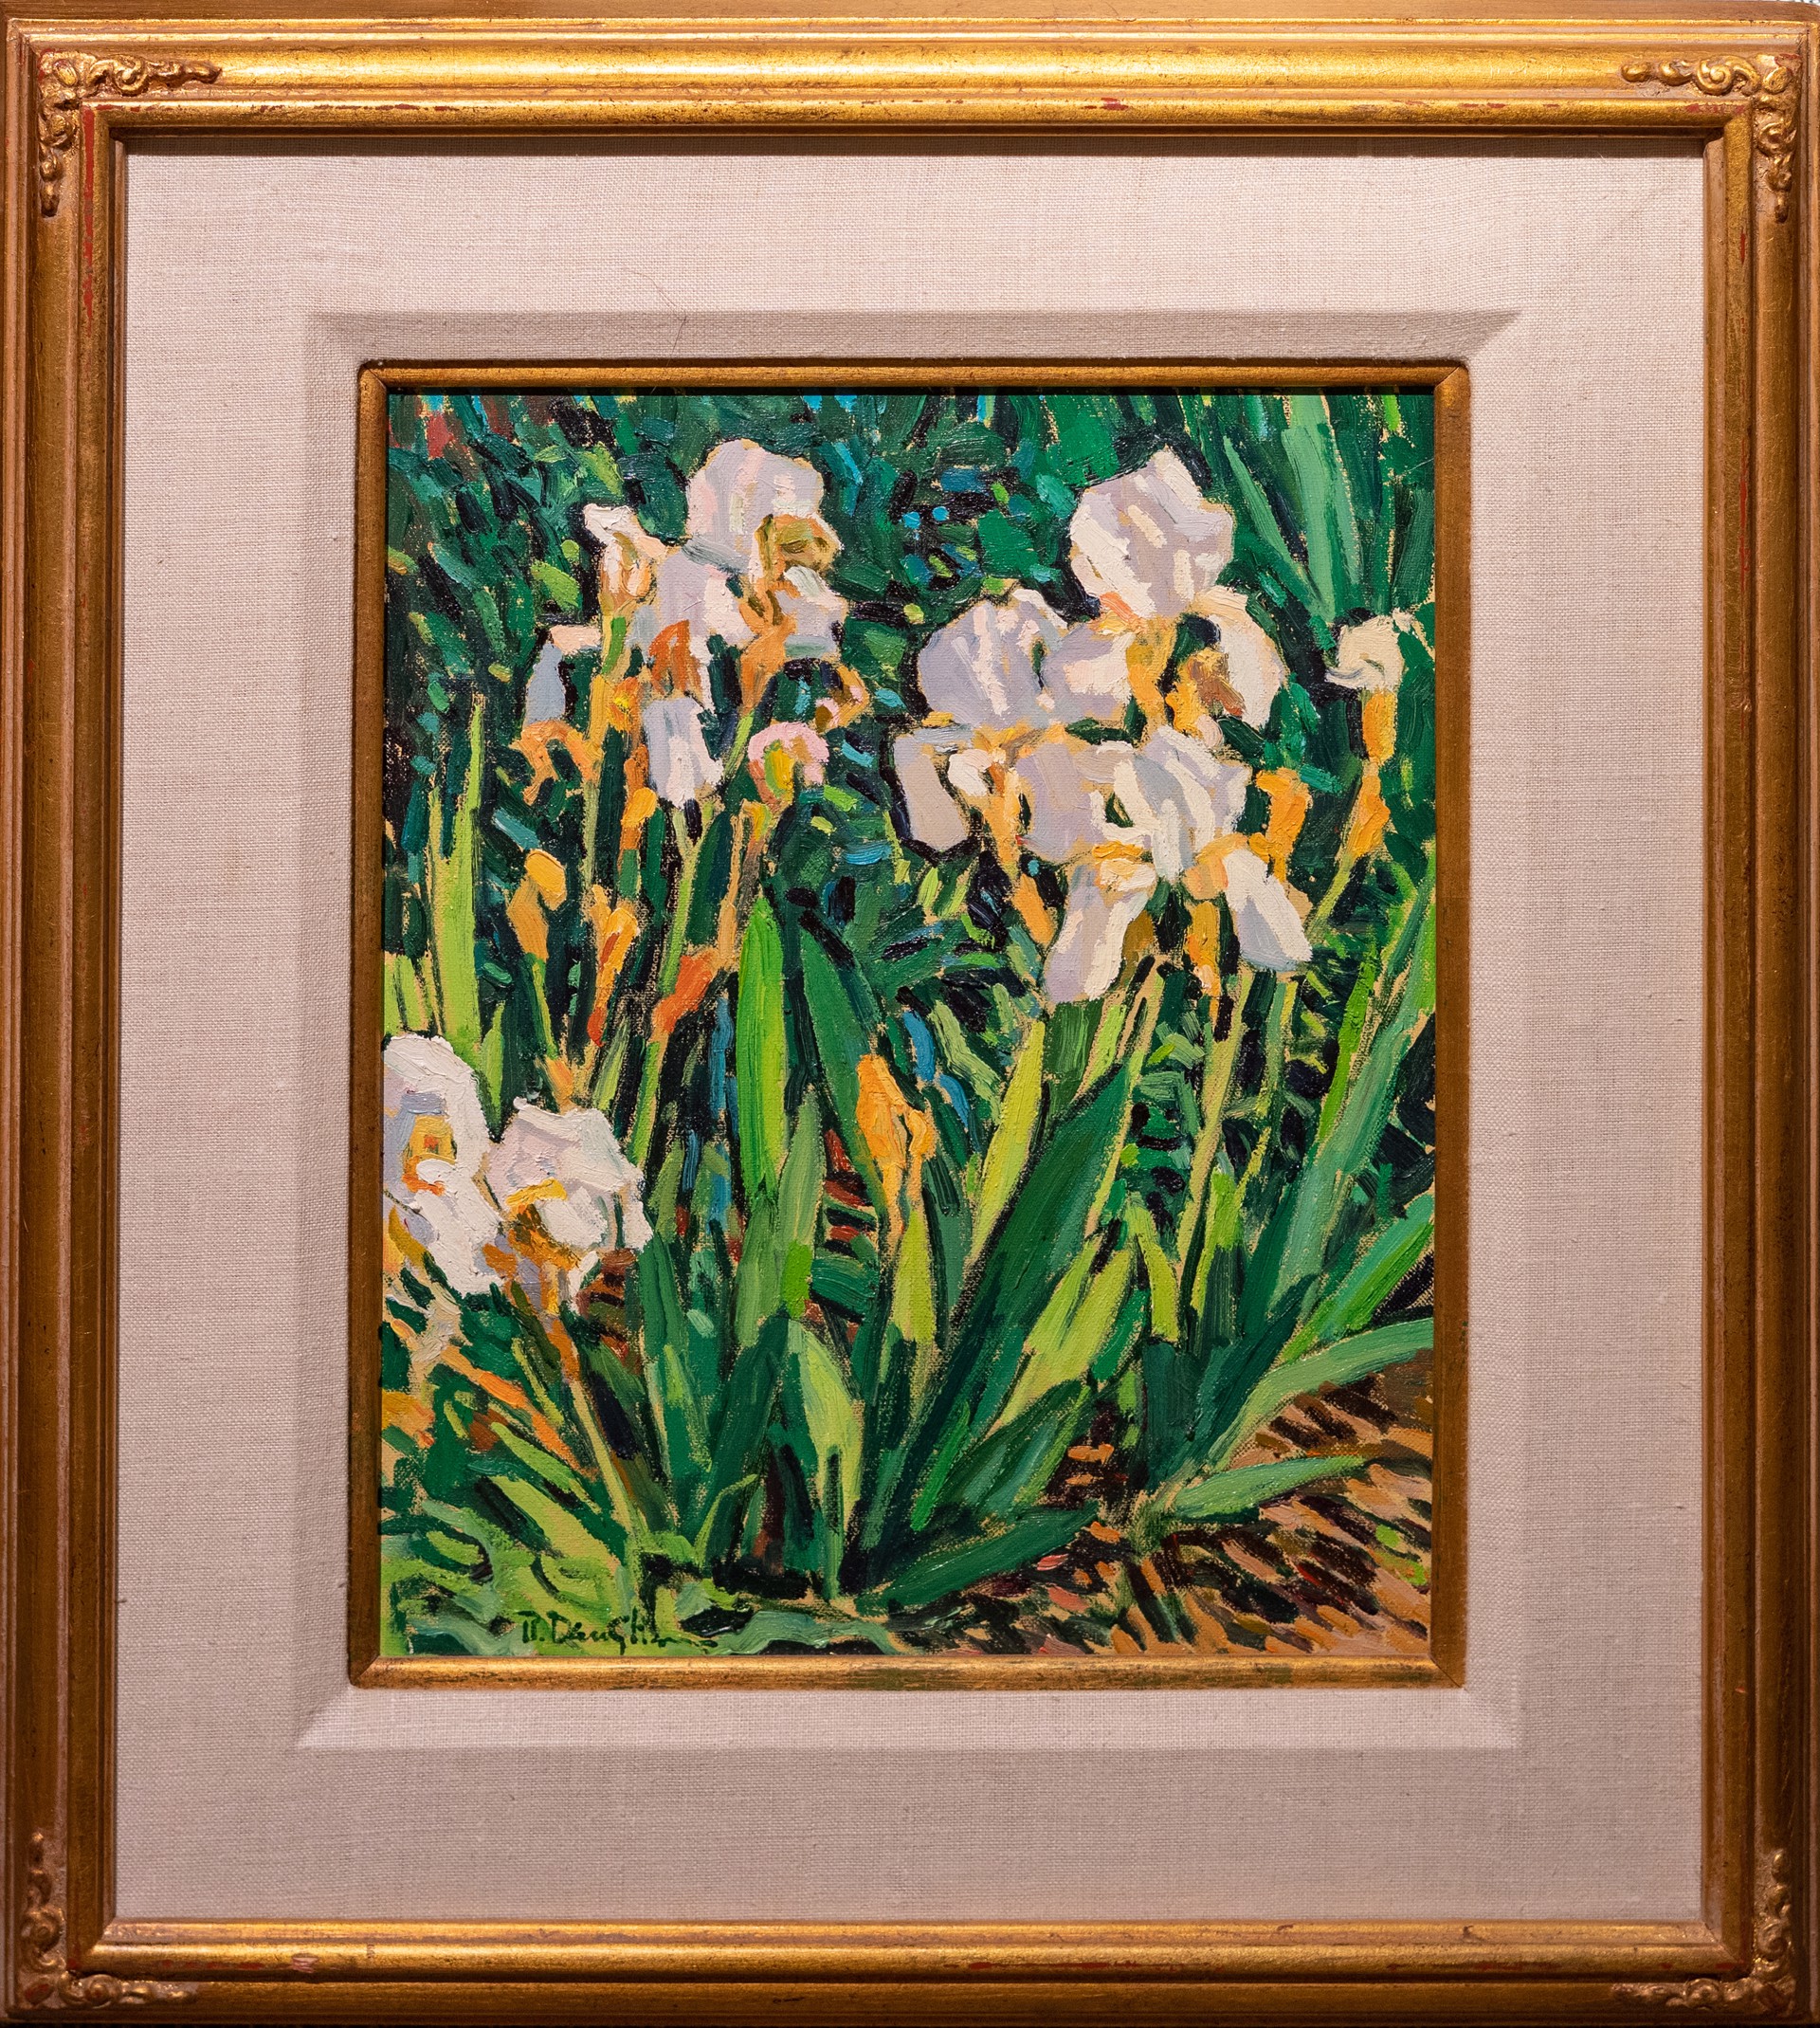 Iris Patch by Robert Daughters (1929-2013)